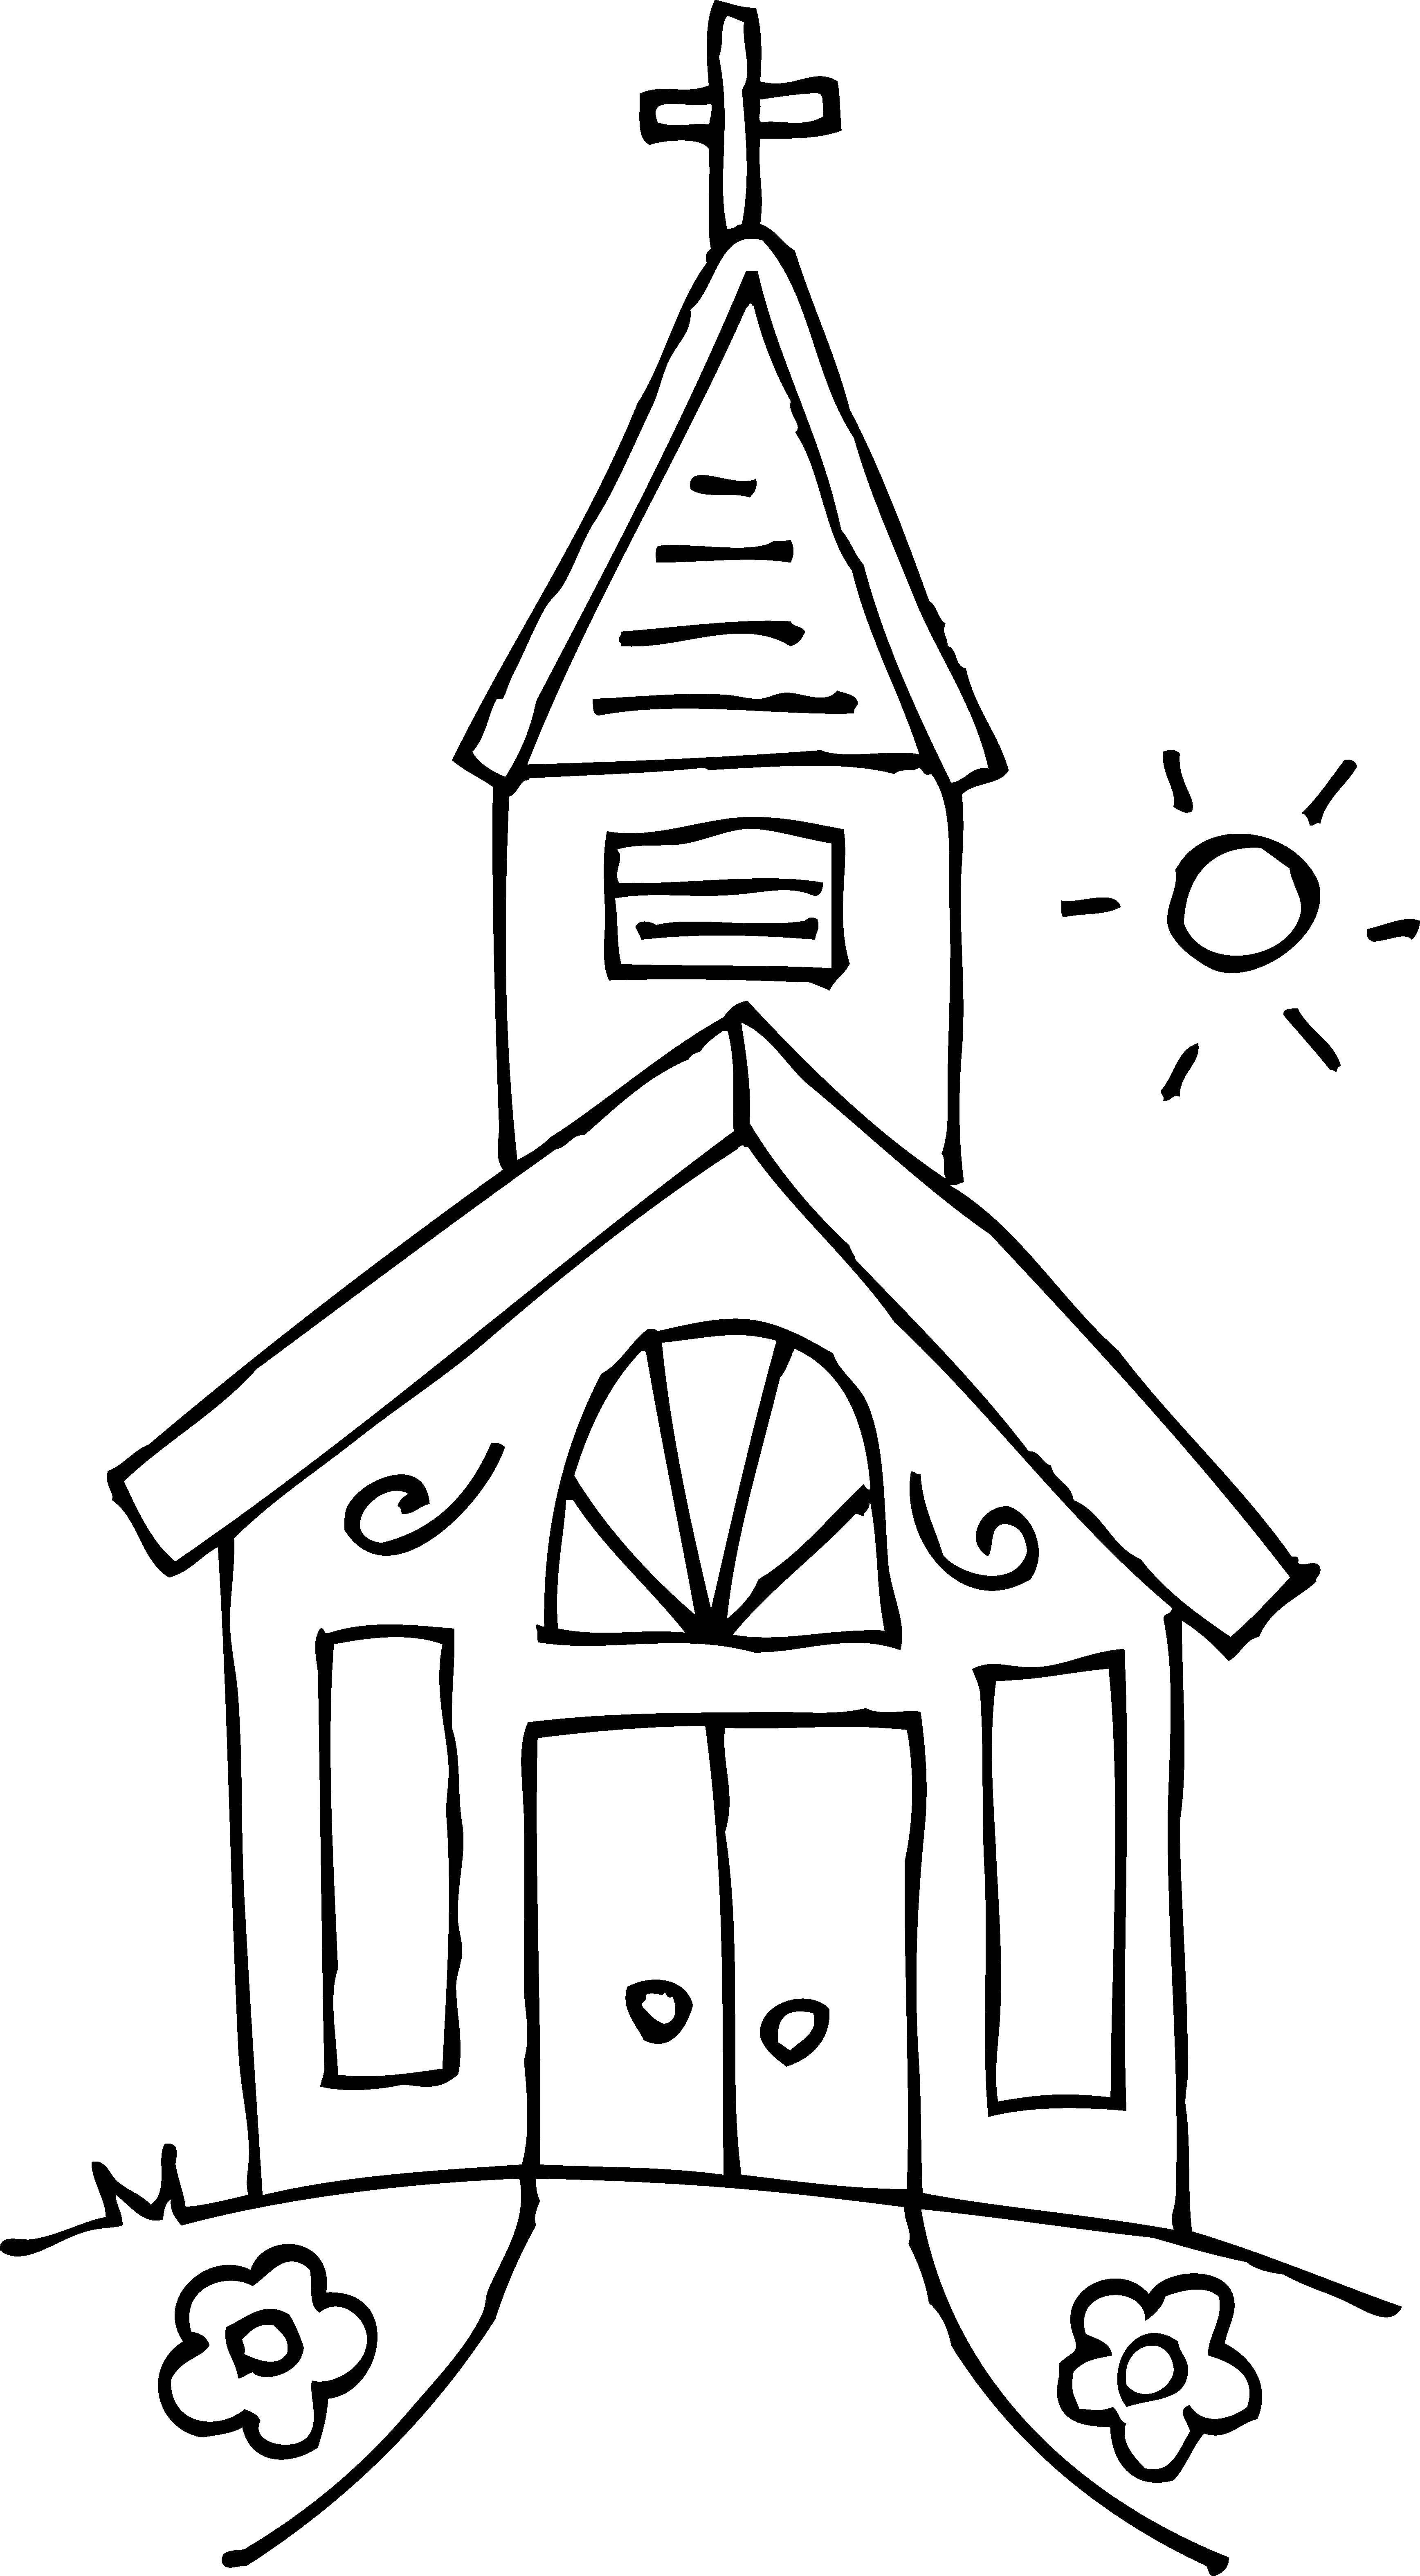 Coloring Church. Category religion. Tags:  religion, Church.